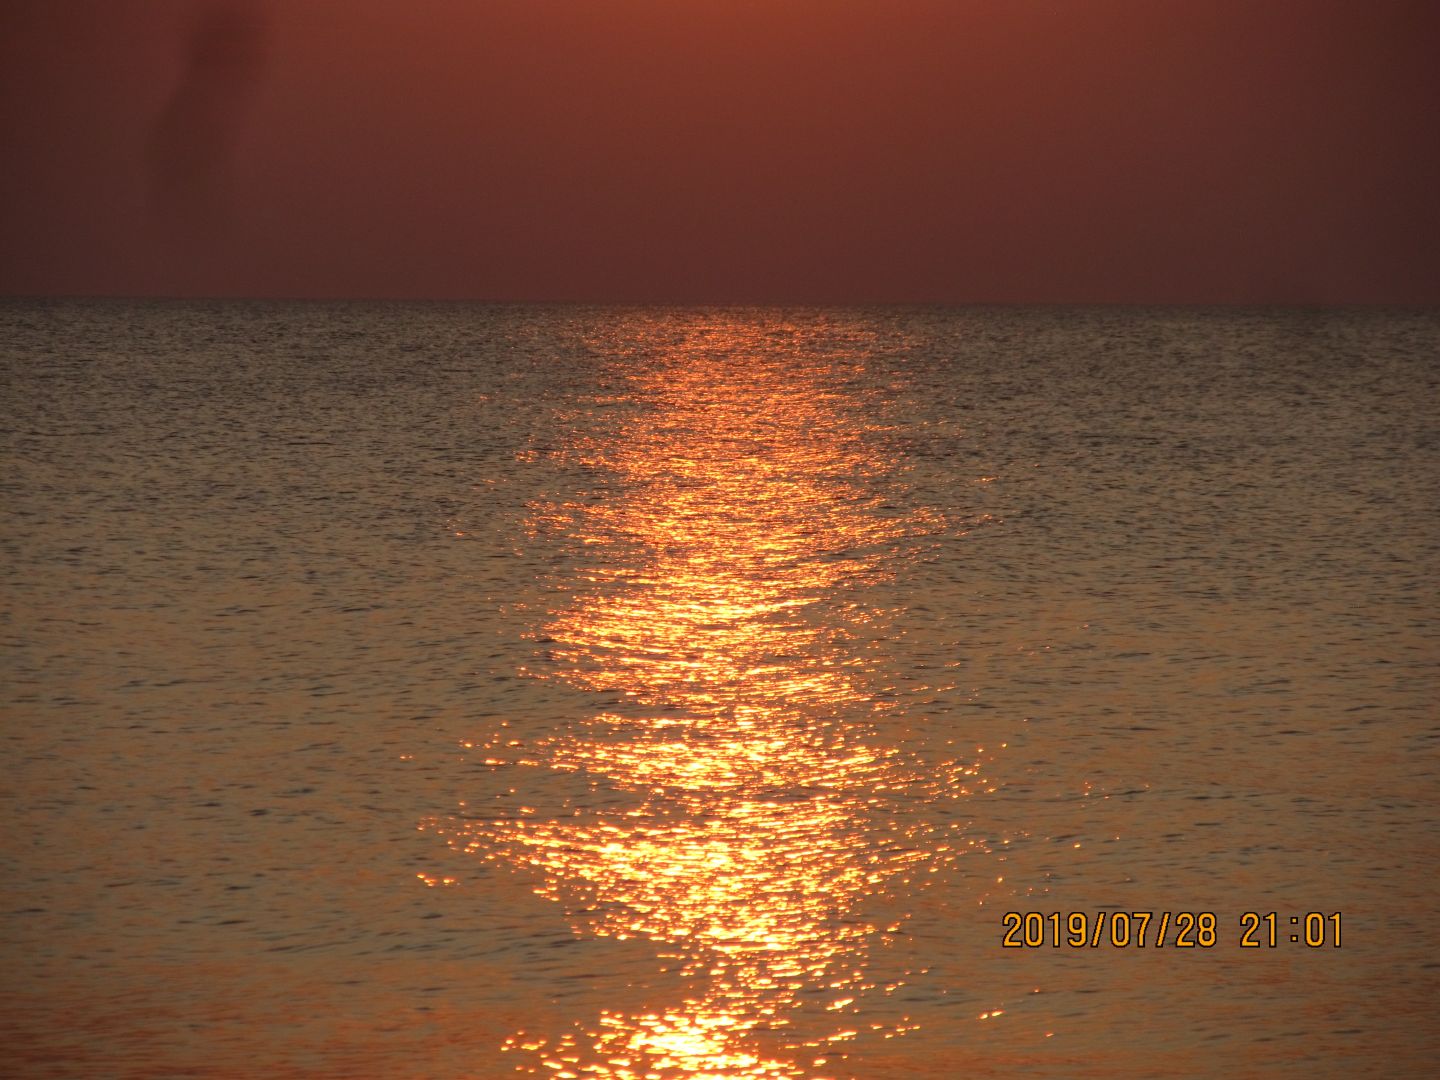 Sea colored red by evening sun